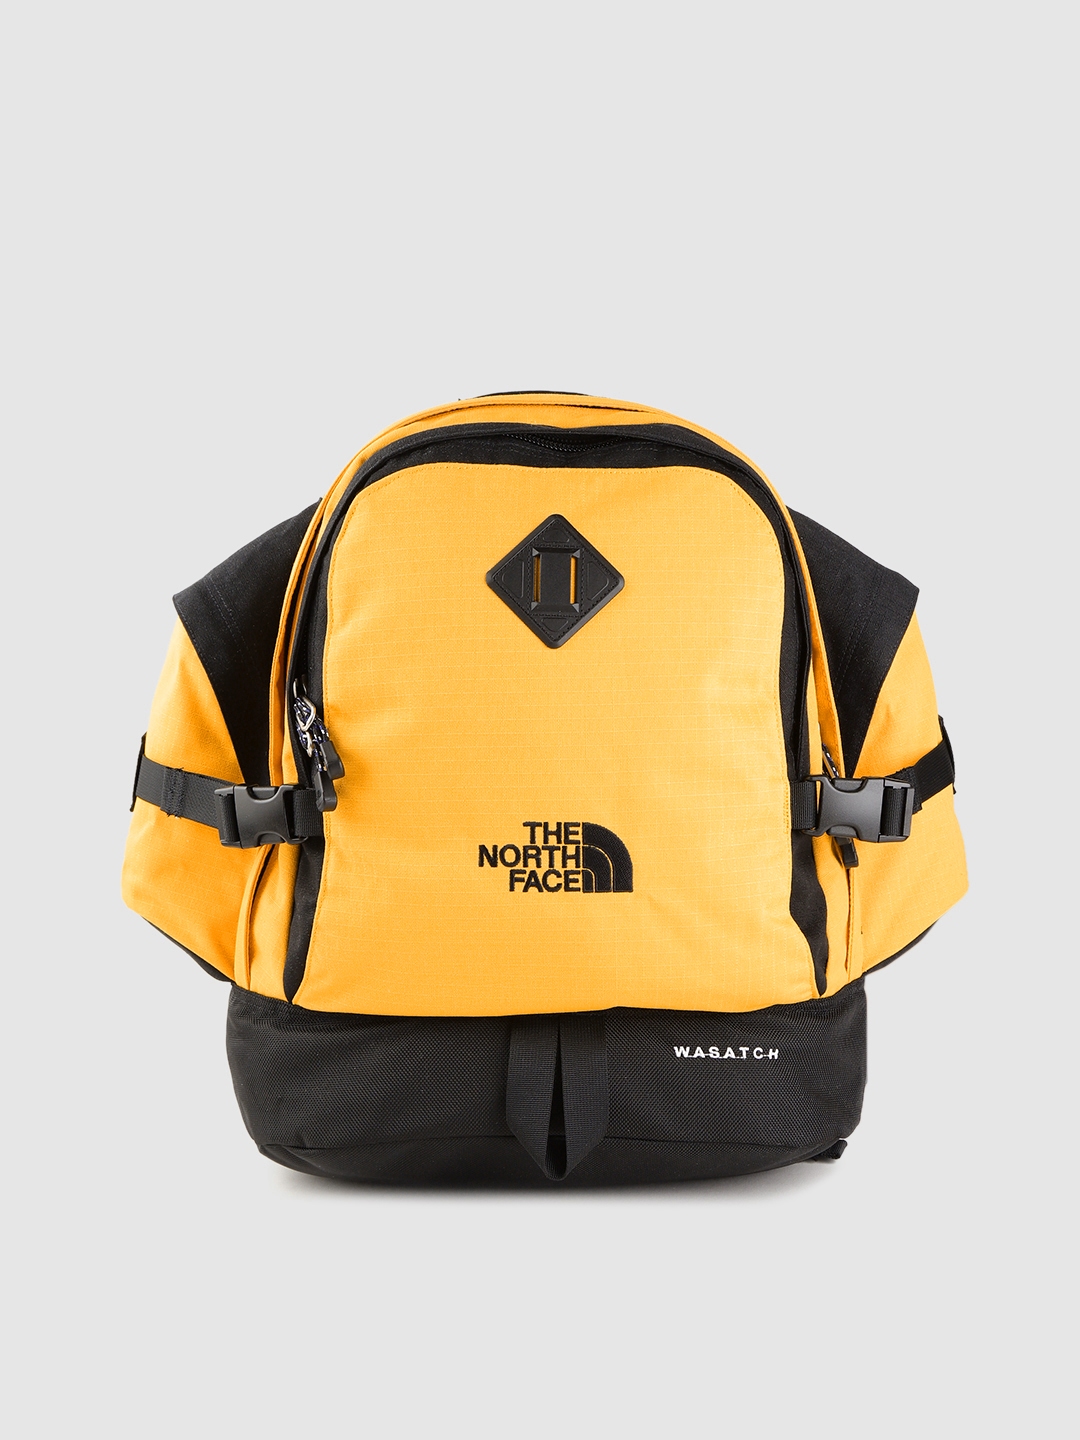 Buy The North Face Unisex Yellow & Black WASATCH Reissue OS